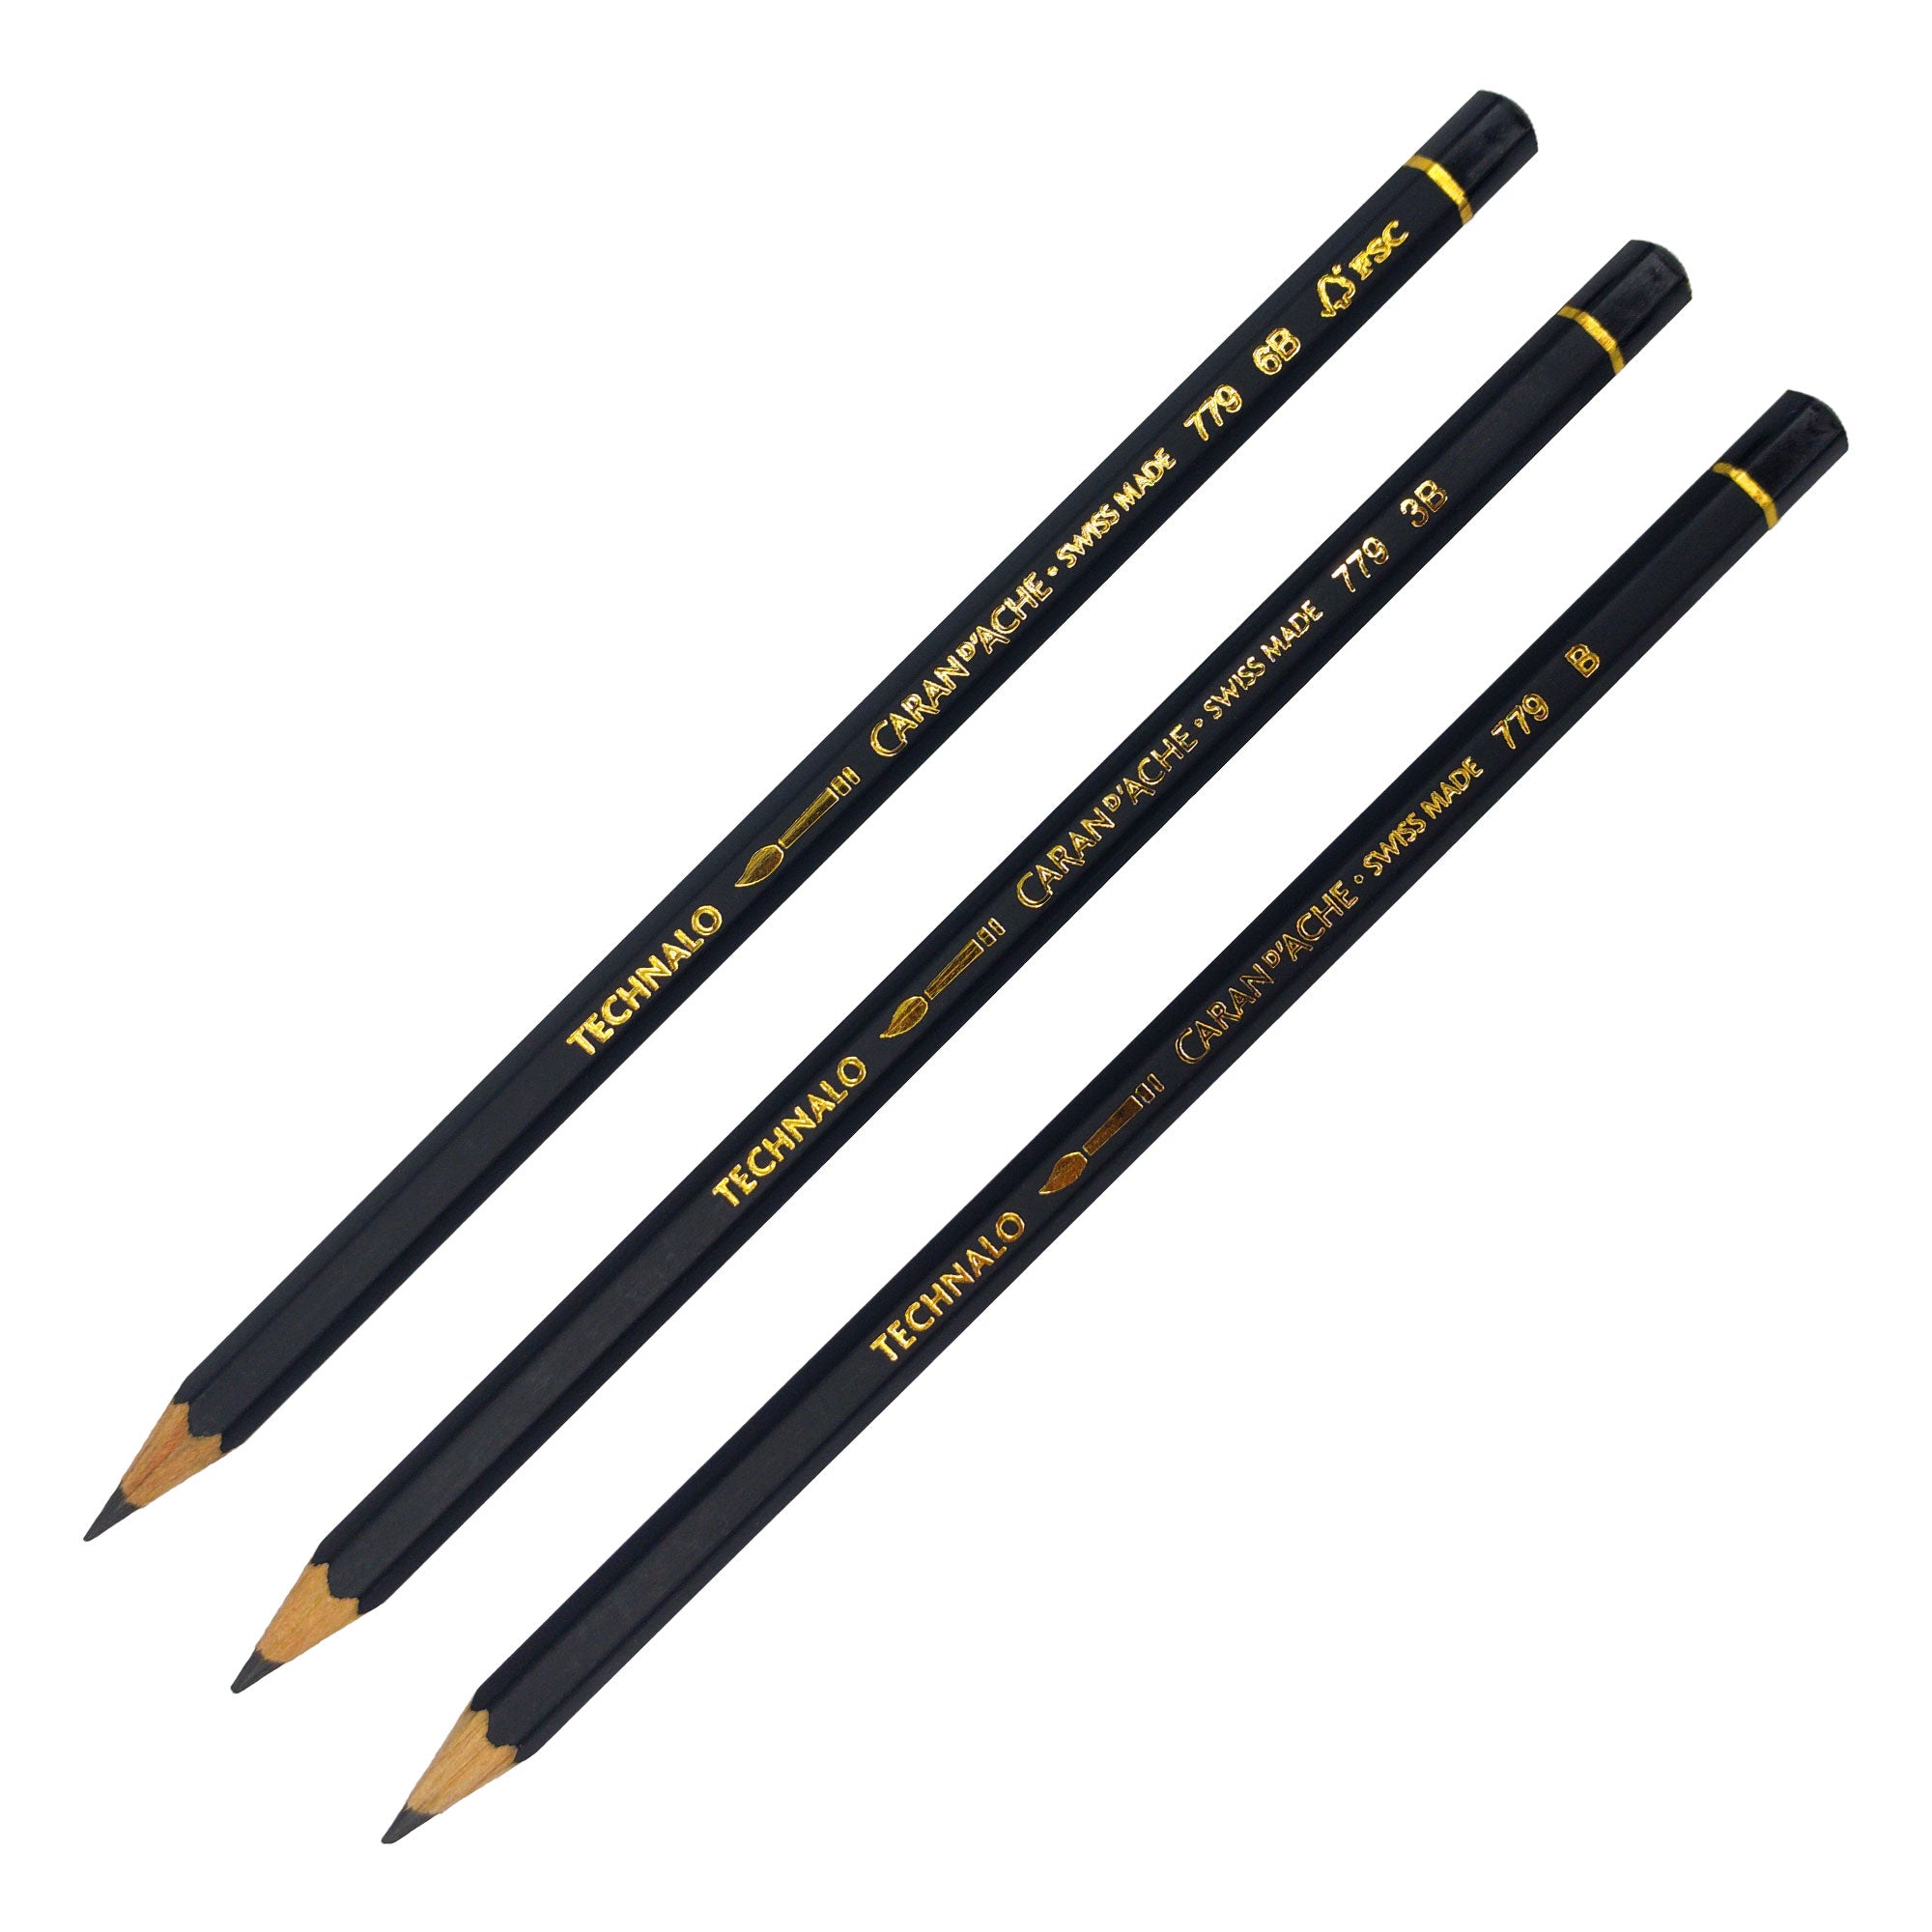 Caran d'Ache Technalo Water Soluble Graphite Pencils in 6B, 3B, and B.